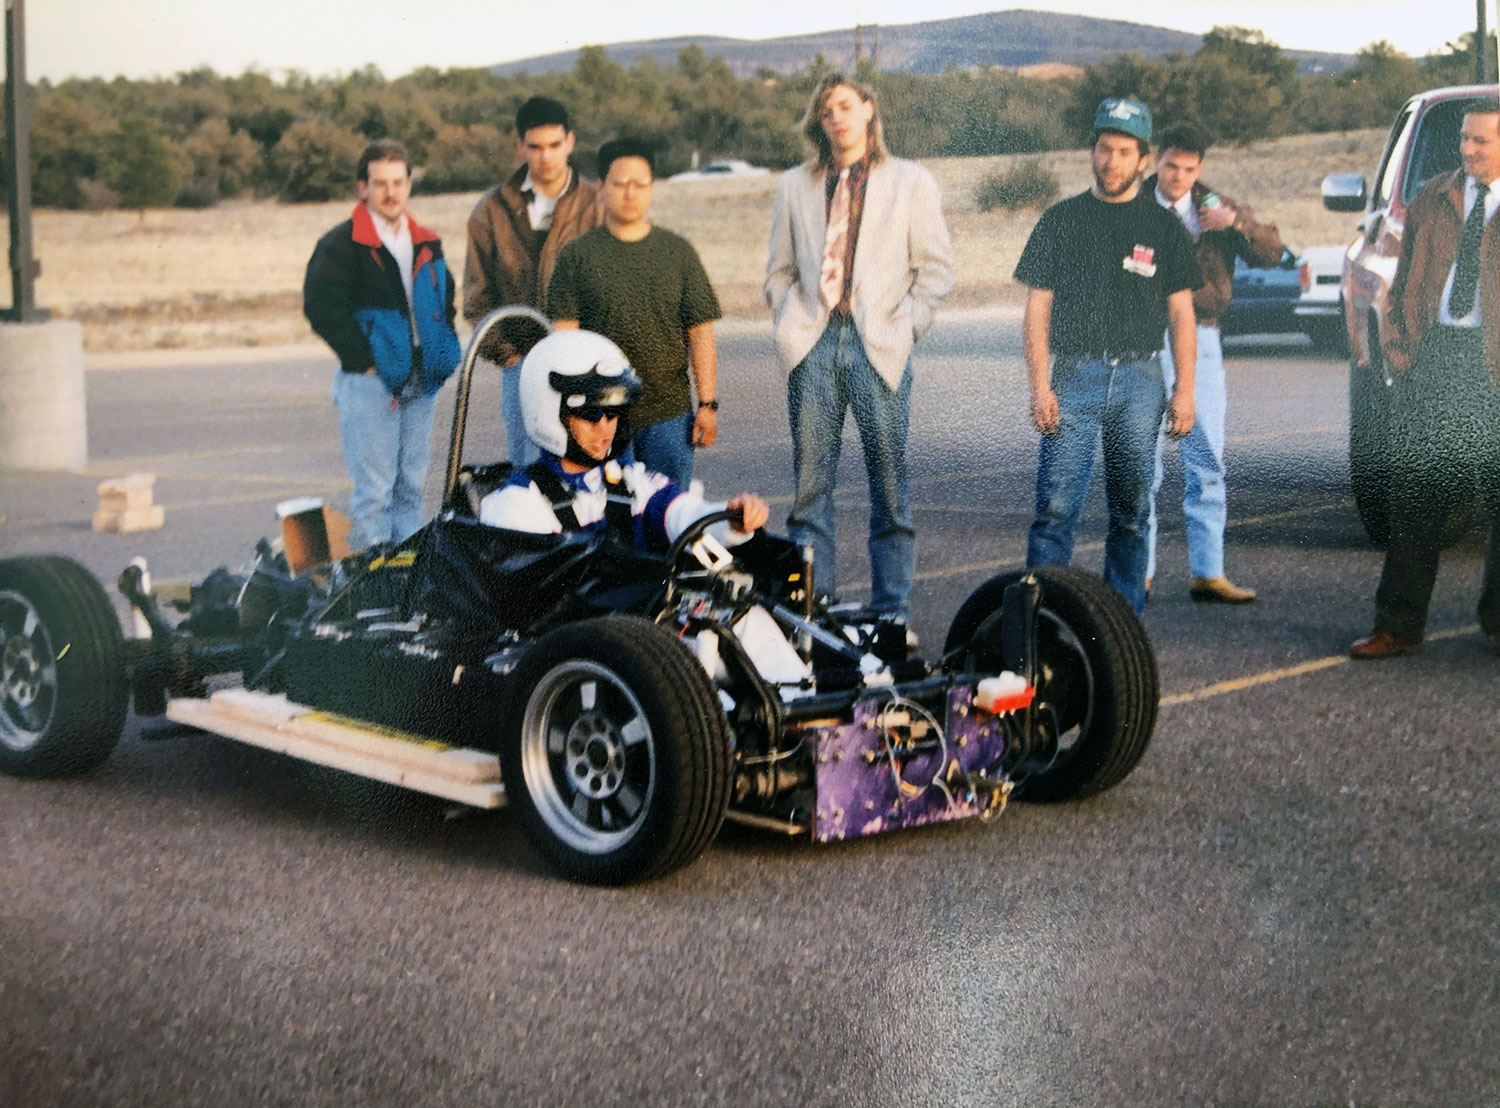 An electric car chassis in a parking lot with driver seated, other students standing nearby